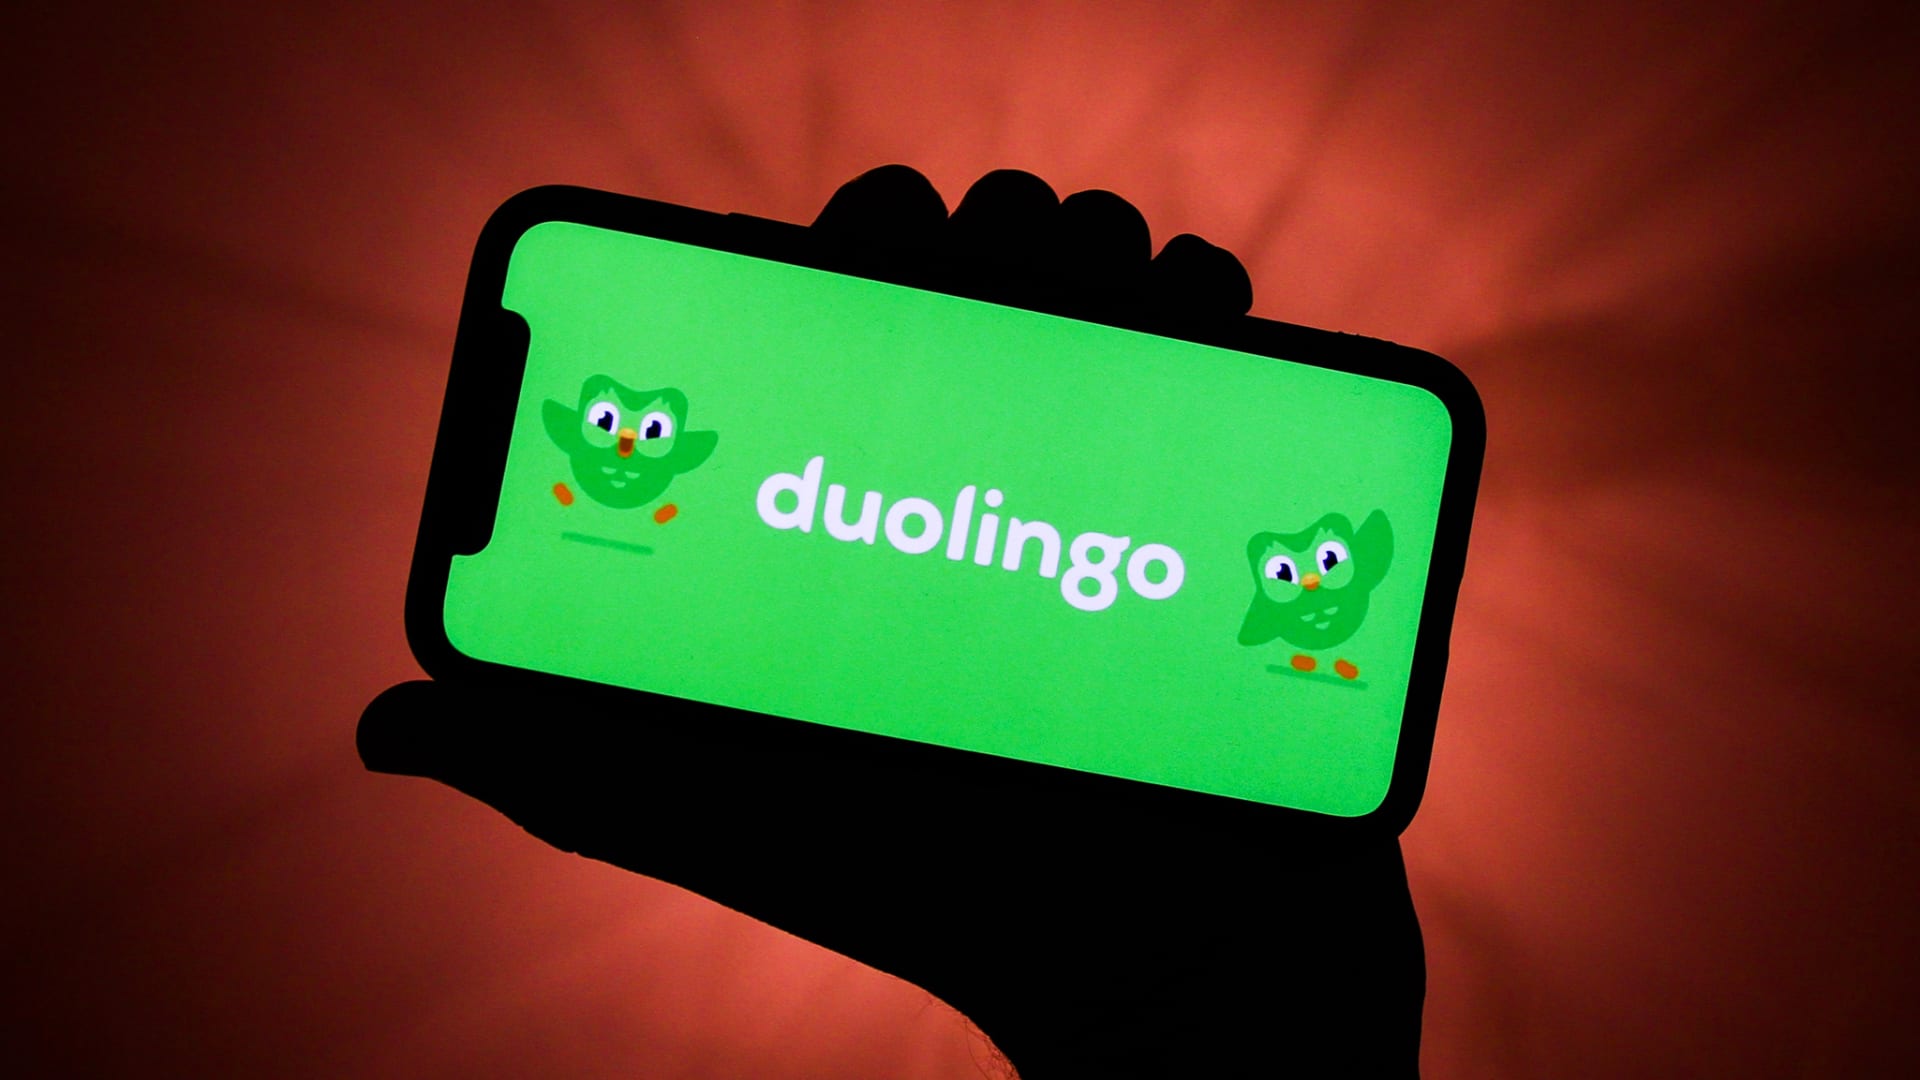 Duolingo Is Valued at $4 Billion. Here's How It Became an Overnight Success, According to Its CEO